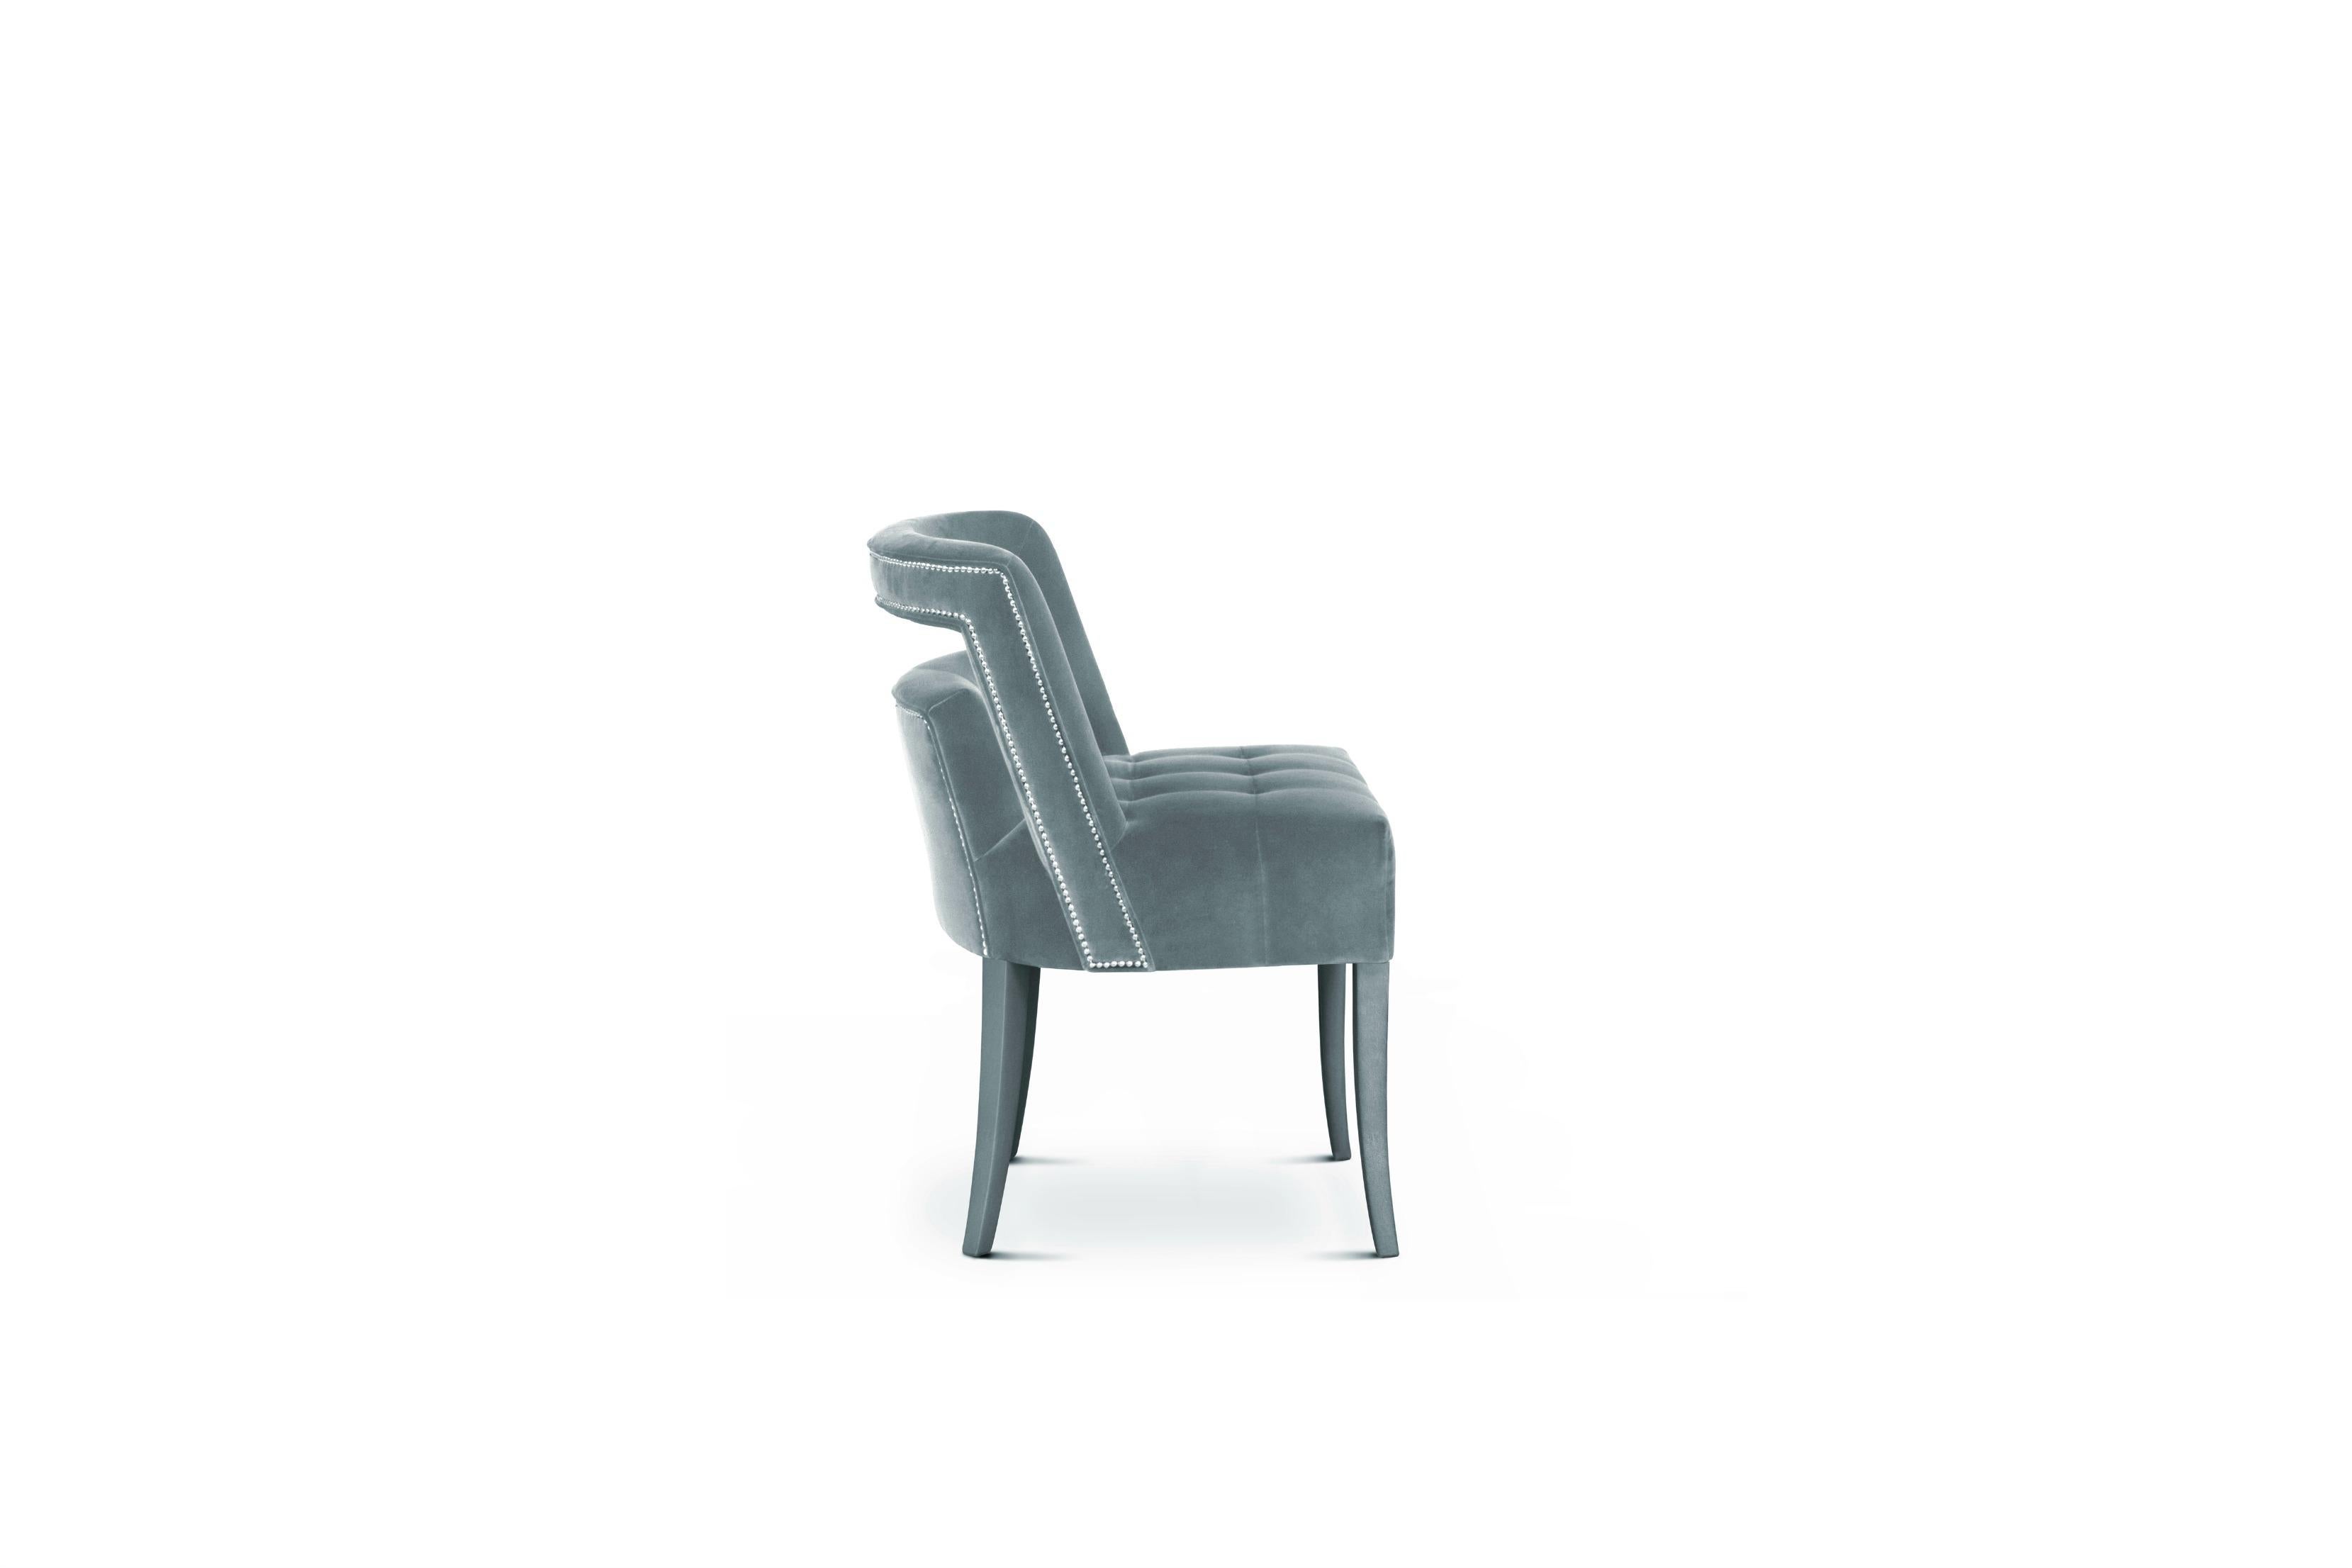 Guatemala was the stage of one of the most important discoveries in the twentieth century – the Naj Tunich. Inspired by it is NAJ Dining Chair, a dining room chair fully upholstered in cotton velvet with nickeled nails. This fabric chair is sure to